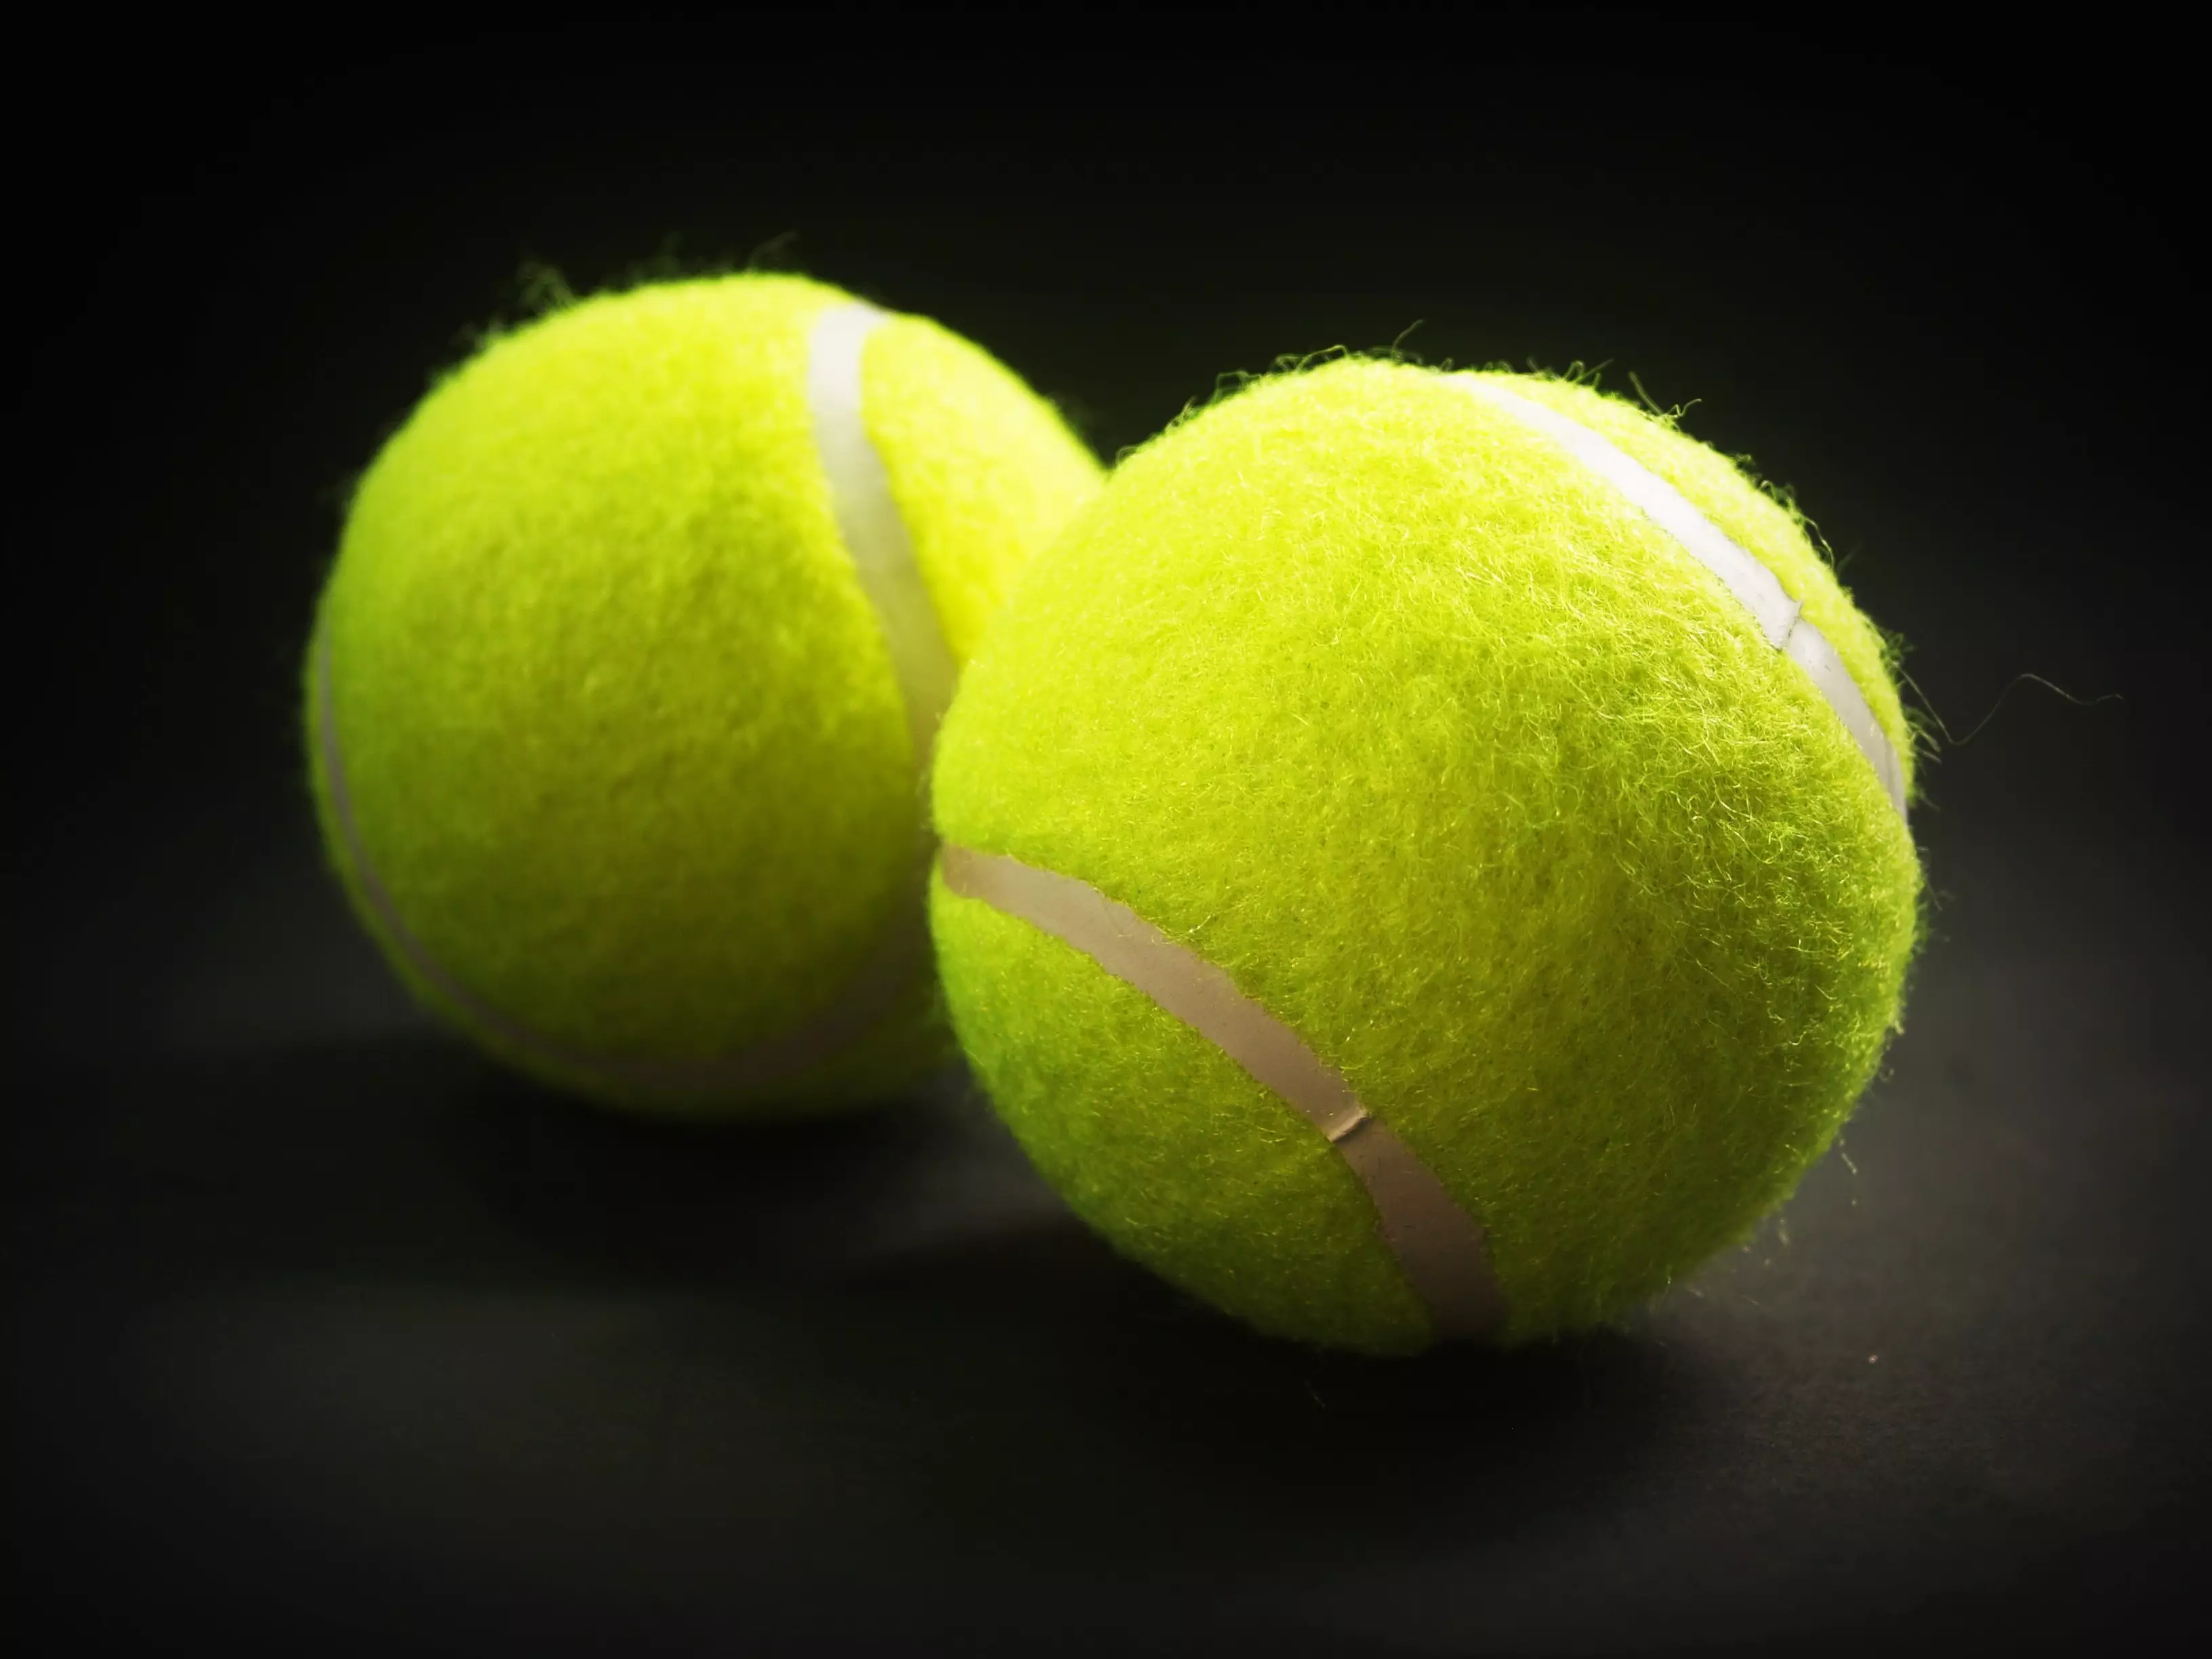 Attaching a tennis ball to the back of your pyjamas can help stop snoring (